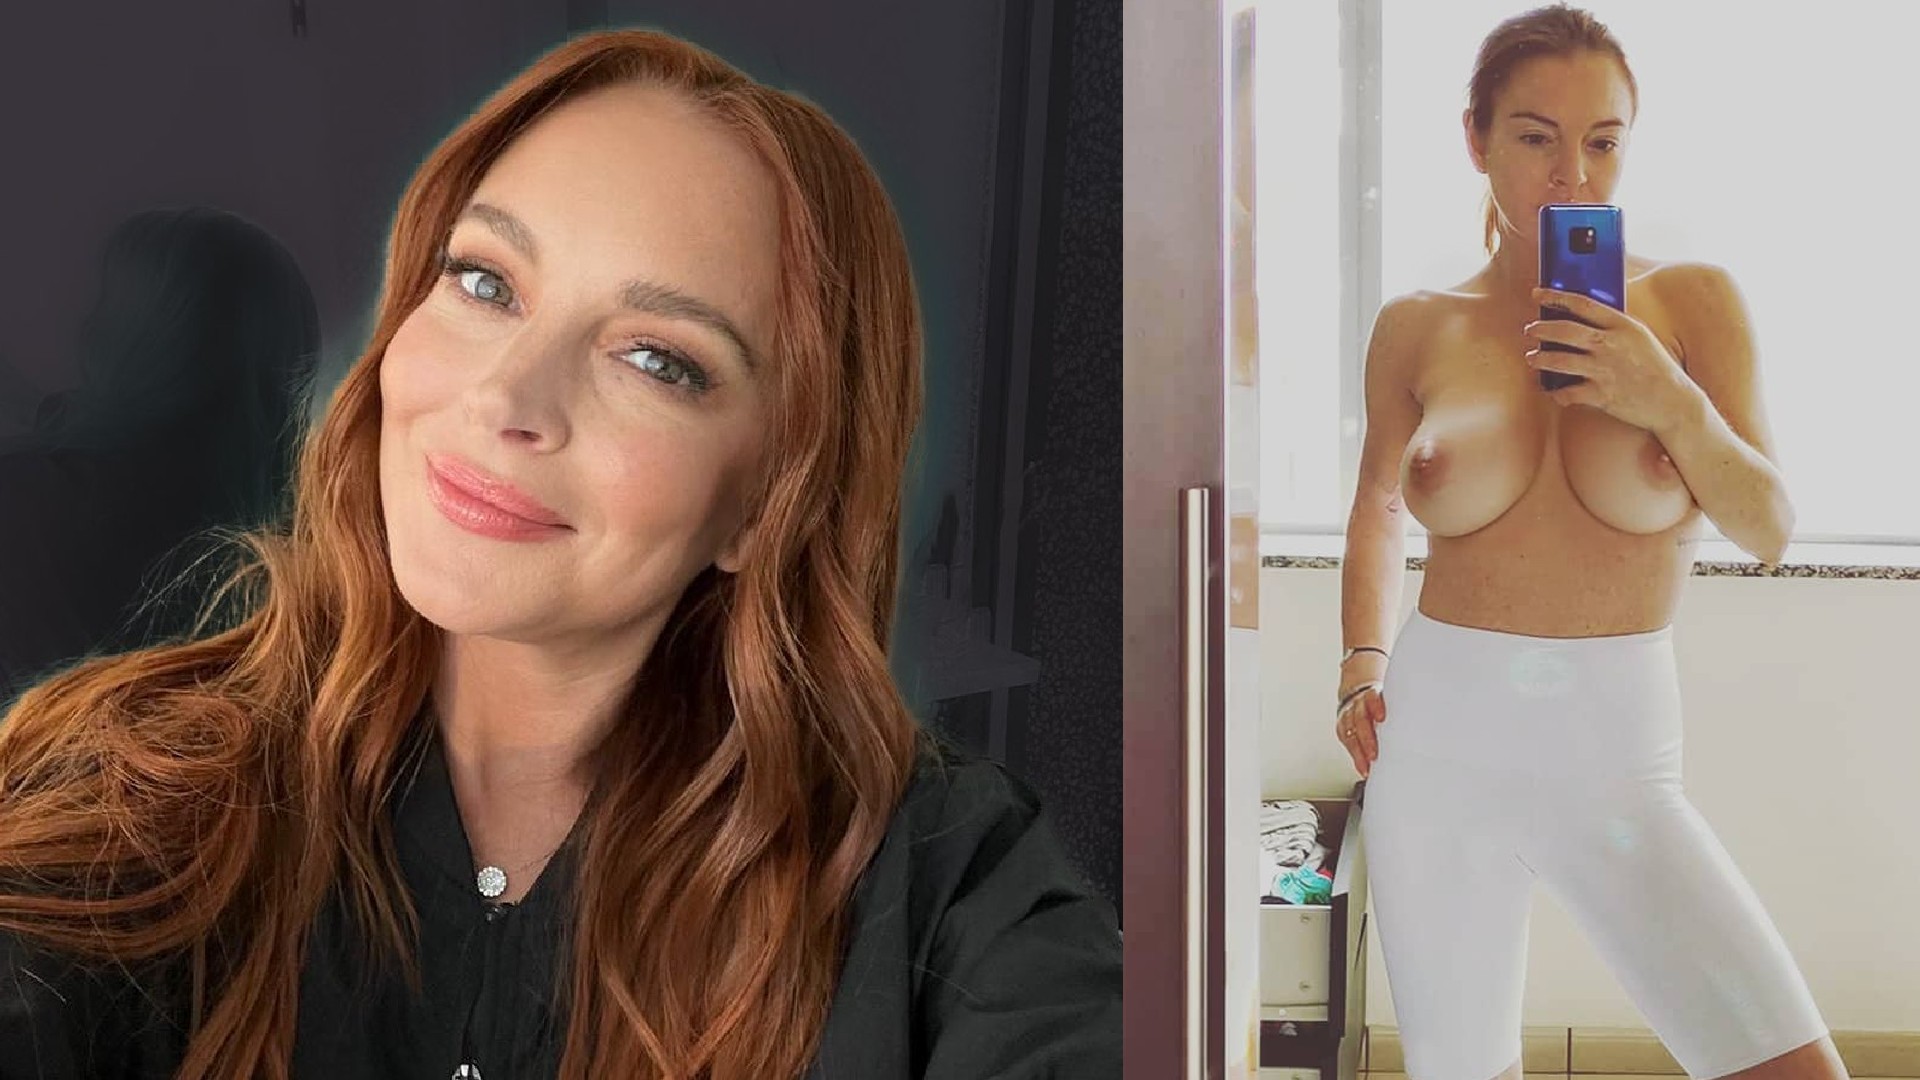 Lindsay Lohan Nudes and Naked Videos (2023) pic picture